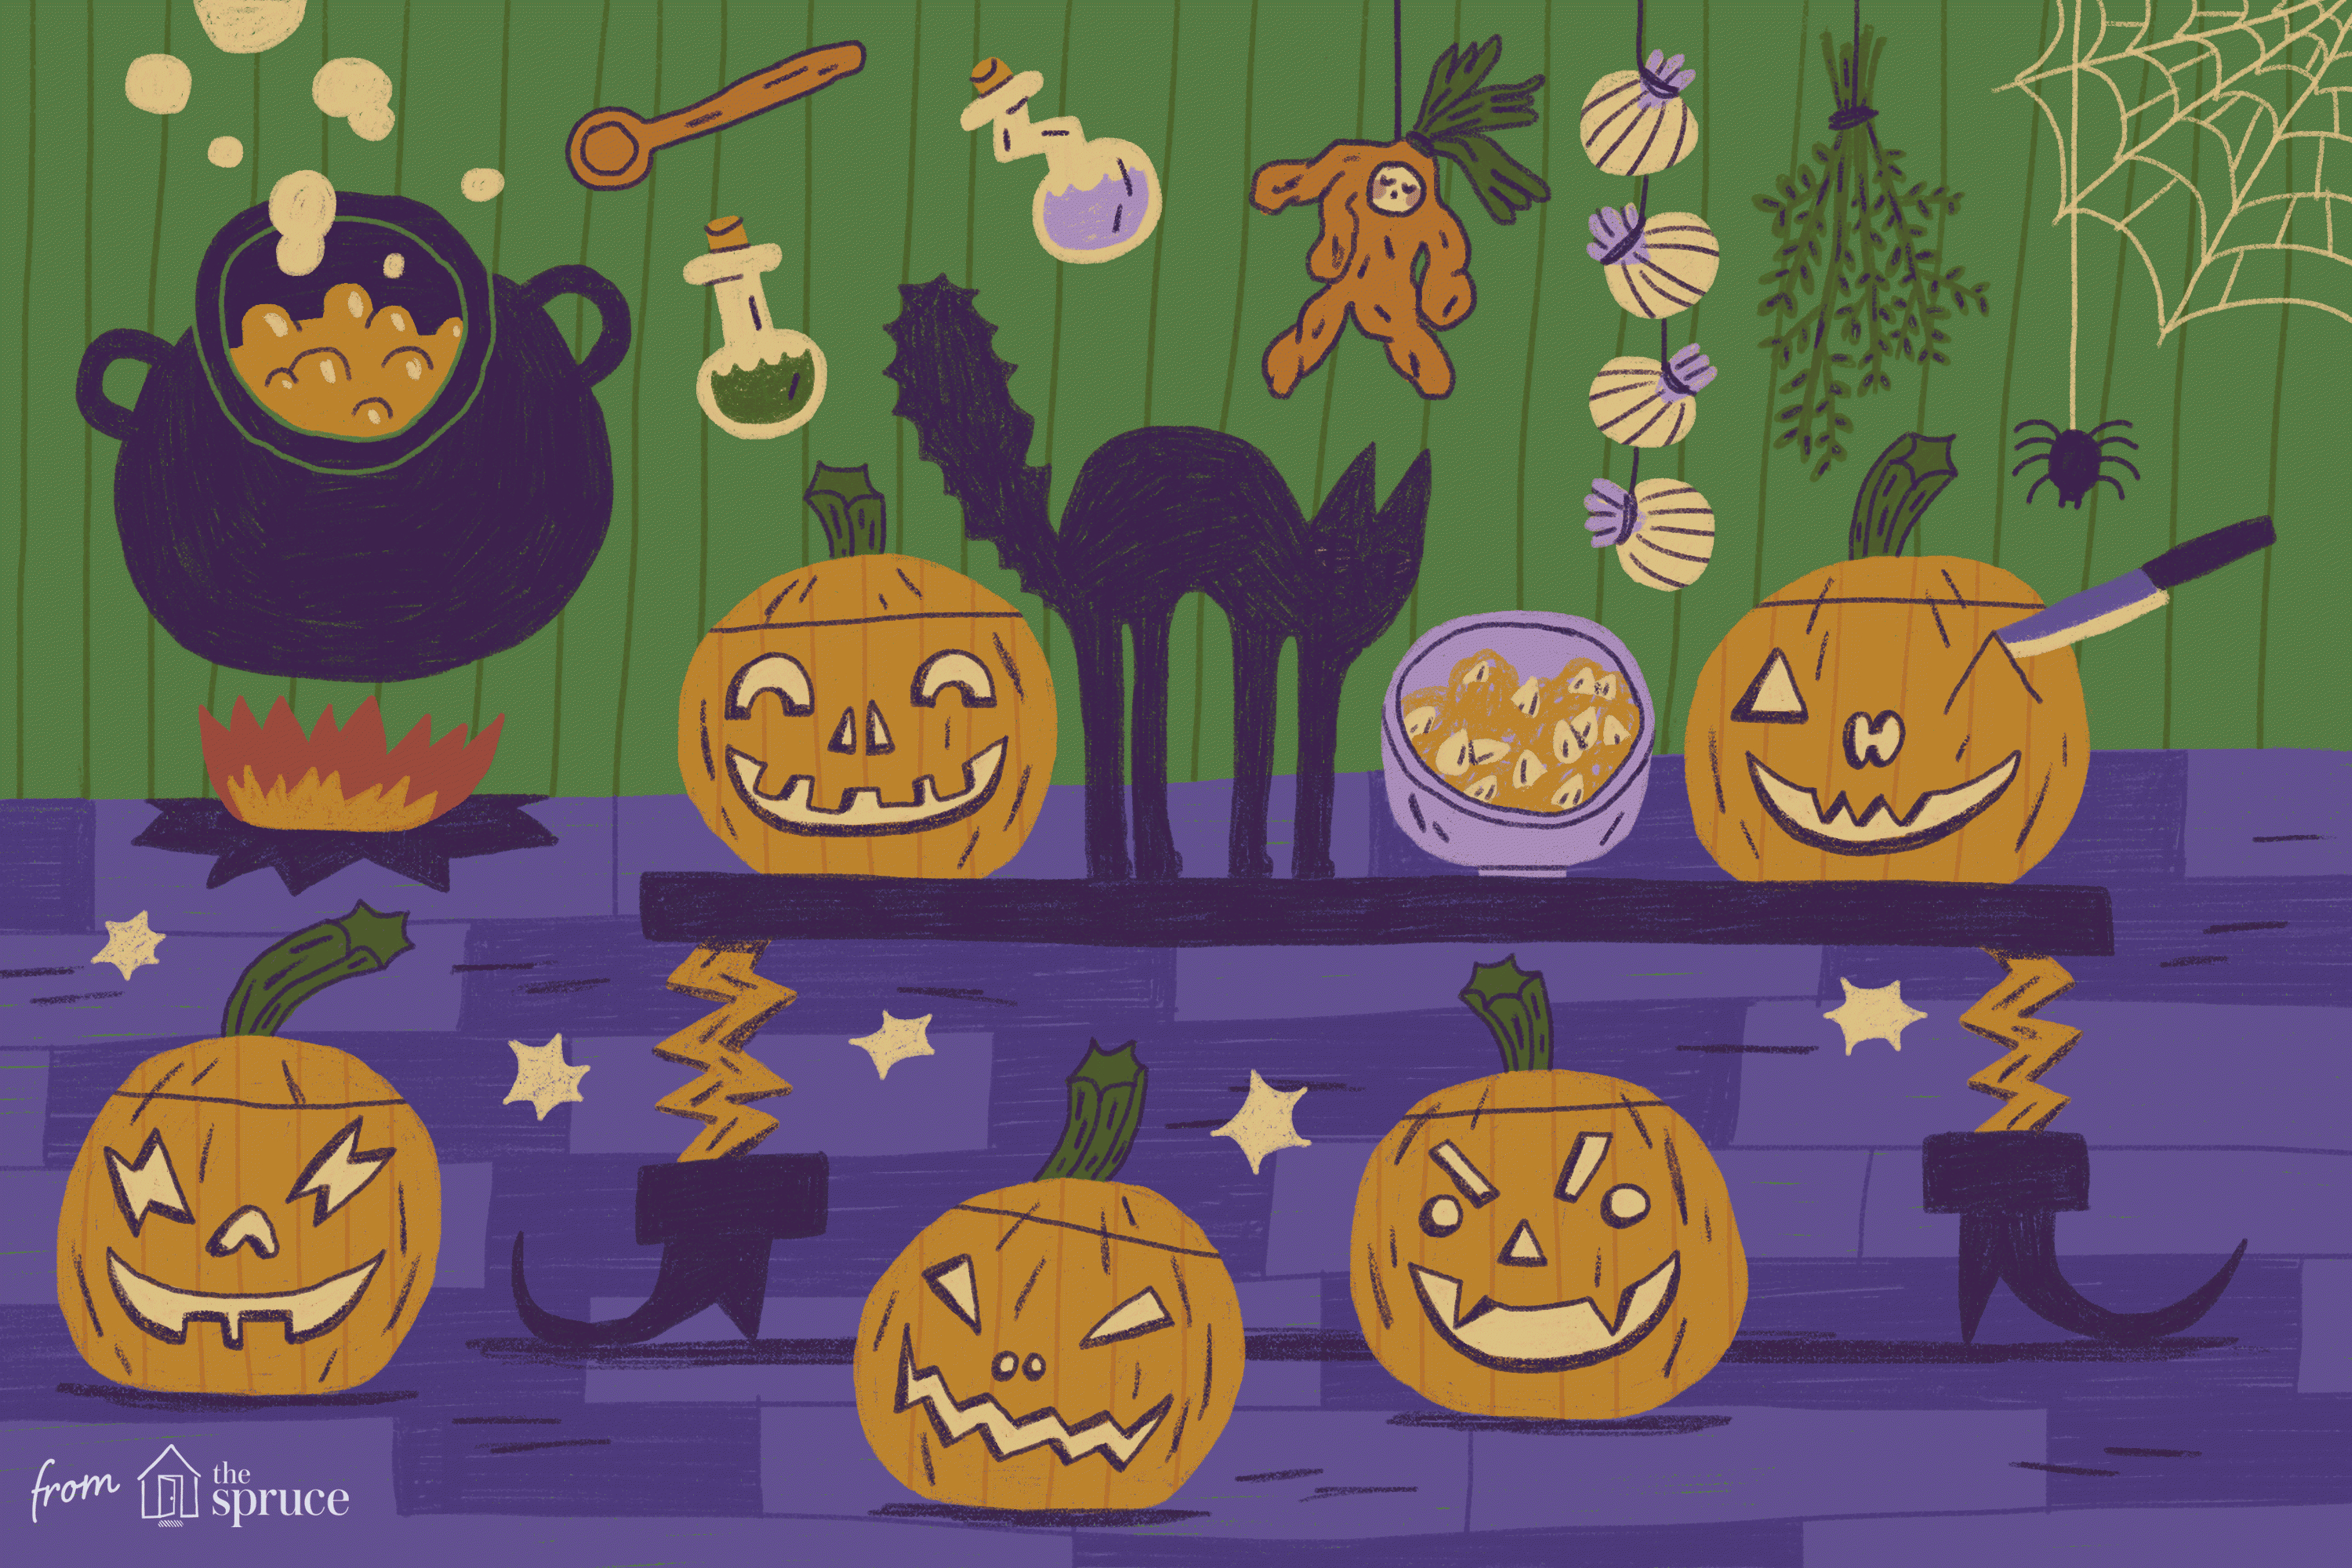 Free Pumpkin Carving Patterns And Templates For Halloween - Free Online Pumpkin Carving Patterns Printable